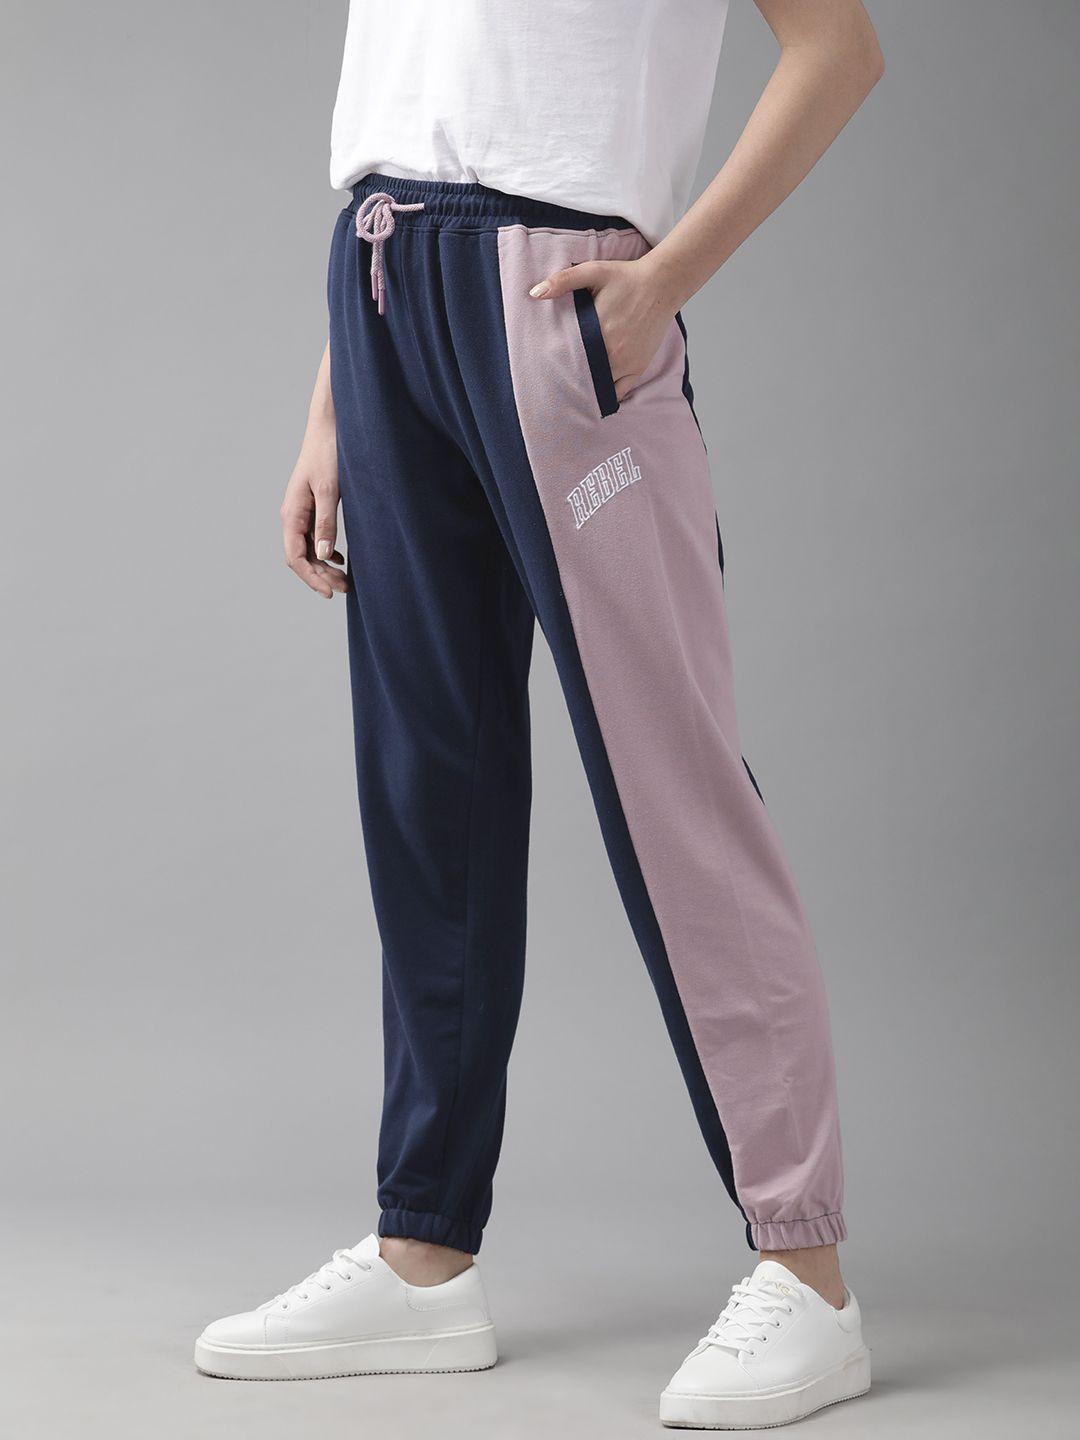 the roadster lifestyle co. women colourblocked relaxed fit joggers